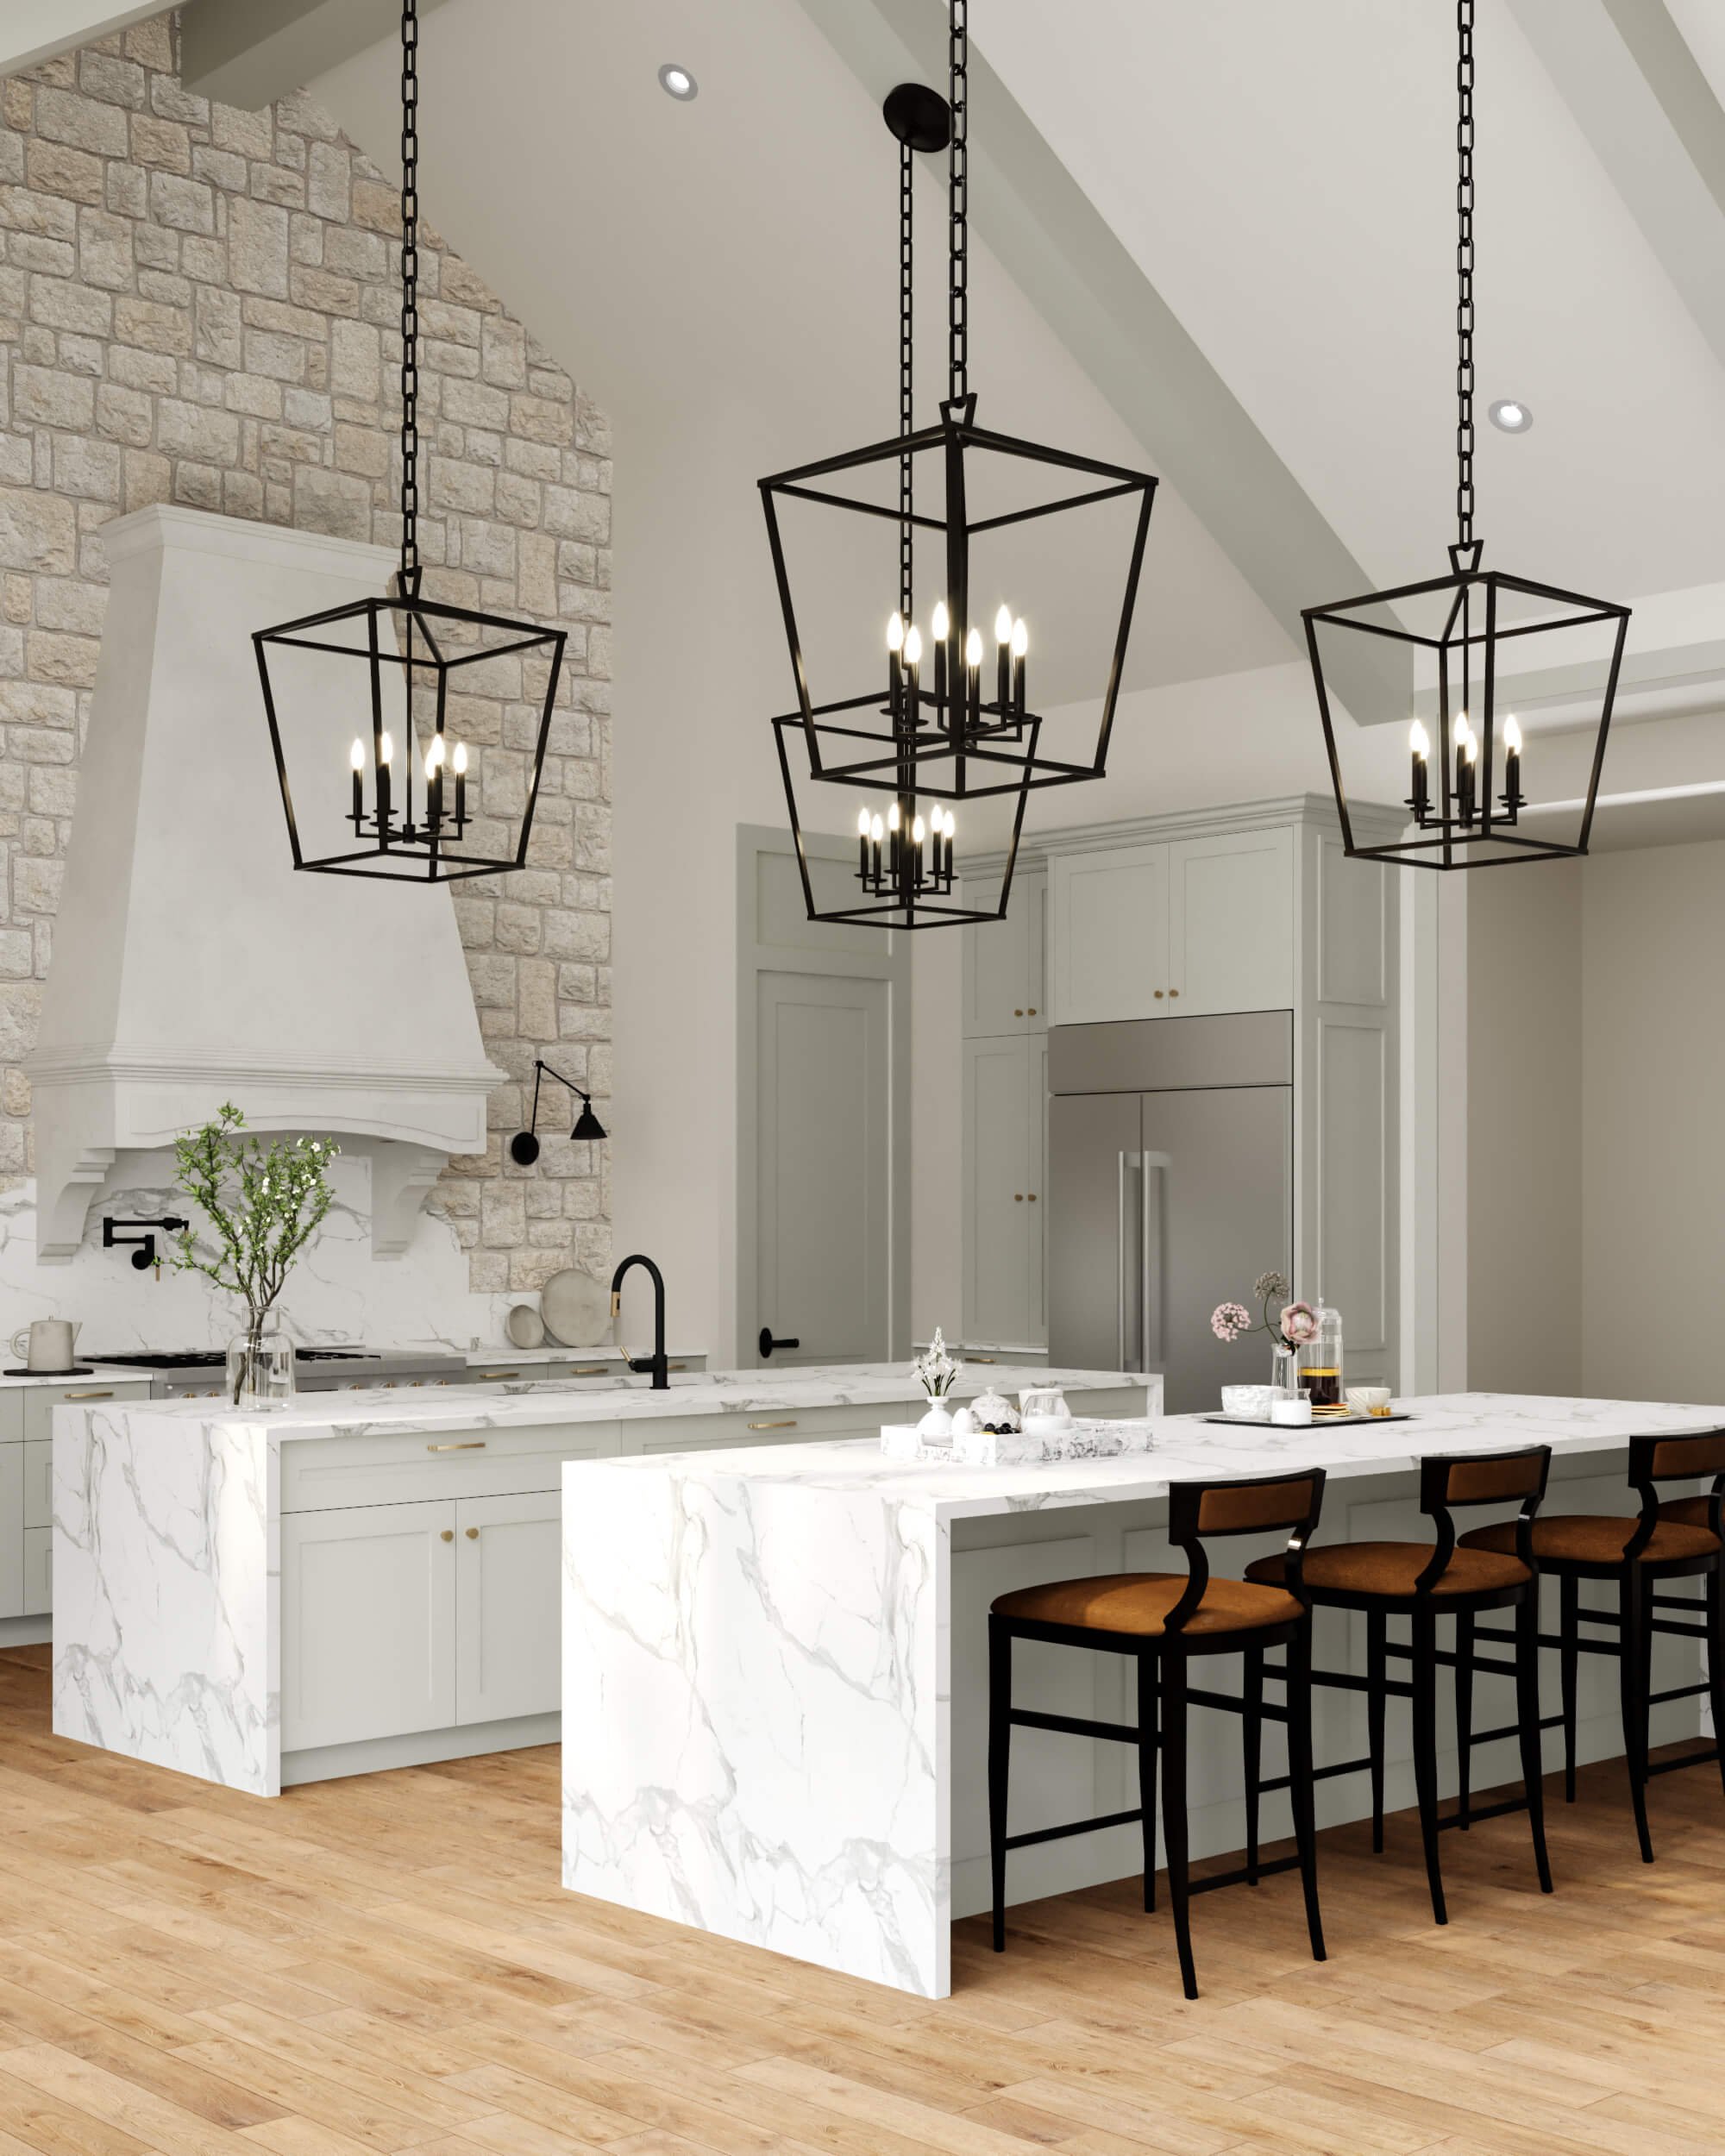 Kitchen Island Side Panel Ideas: Transform Your Kitchen with These Creative Designs